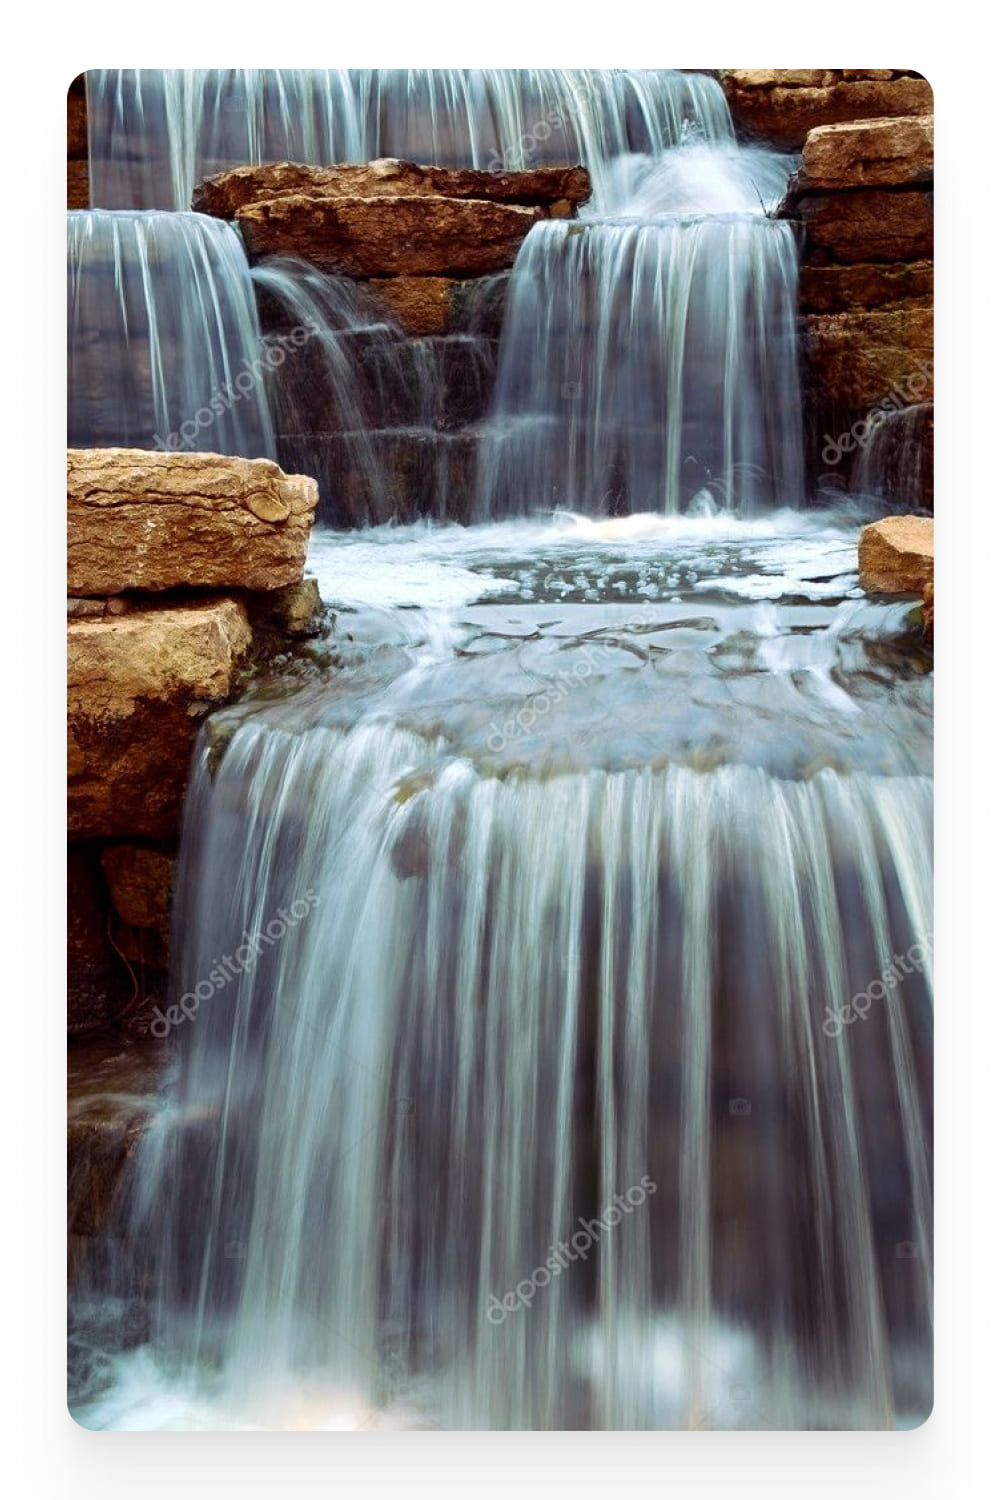 Photo of a small waterfall in several steps.